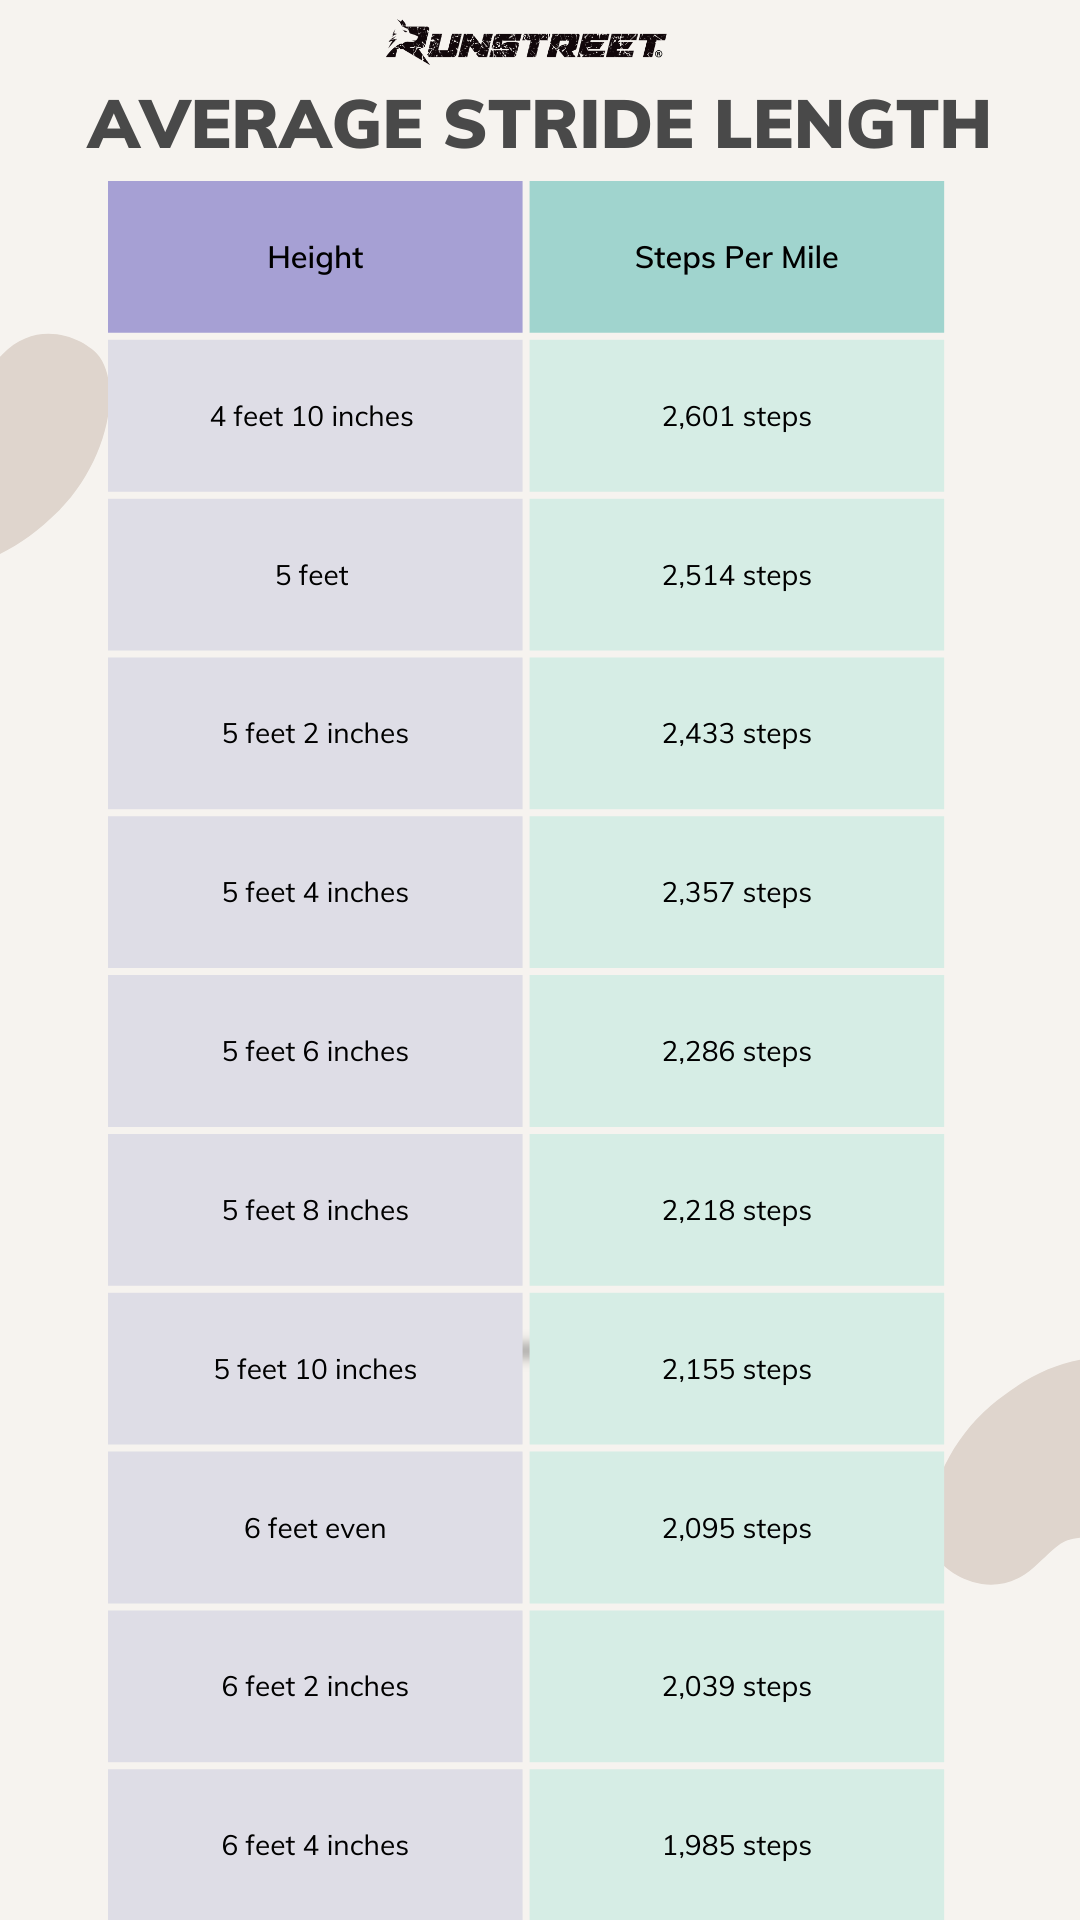 How Many Steps Are Typically Taken In A Mile Of Running